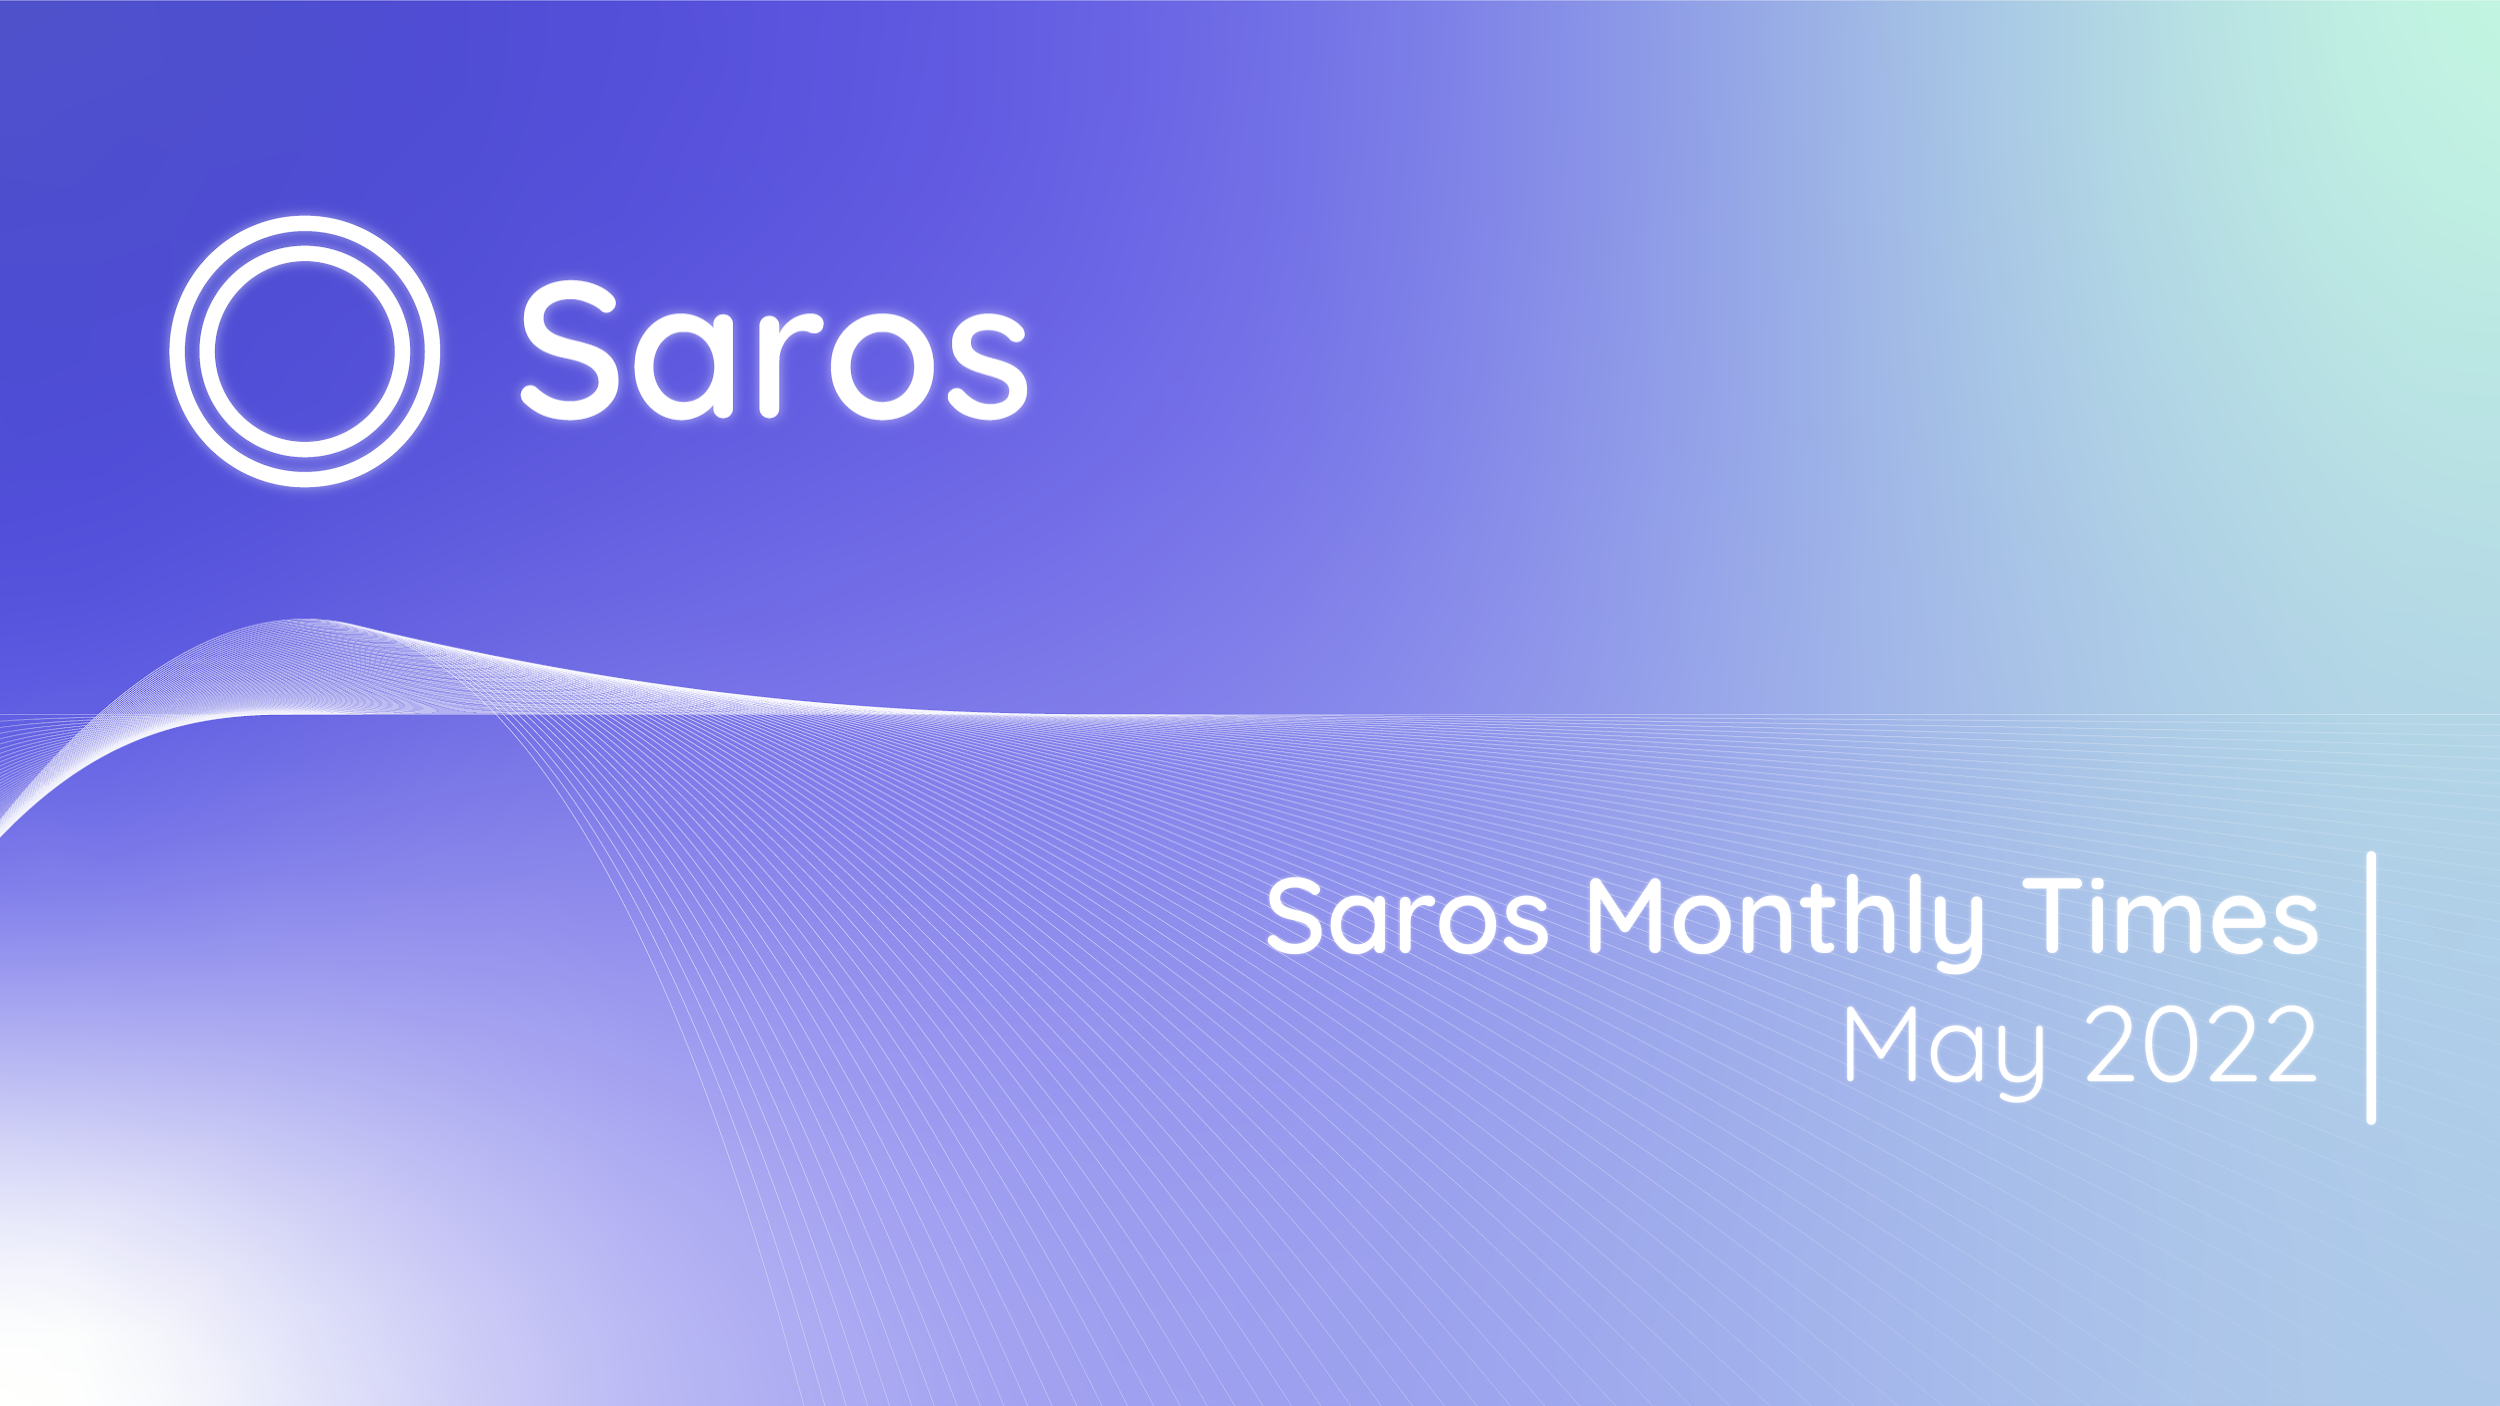 Saros Monthly Times - May 2022